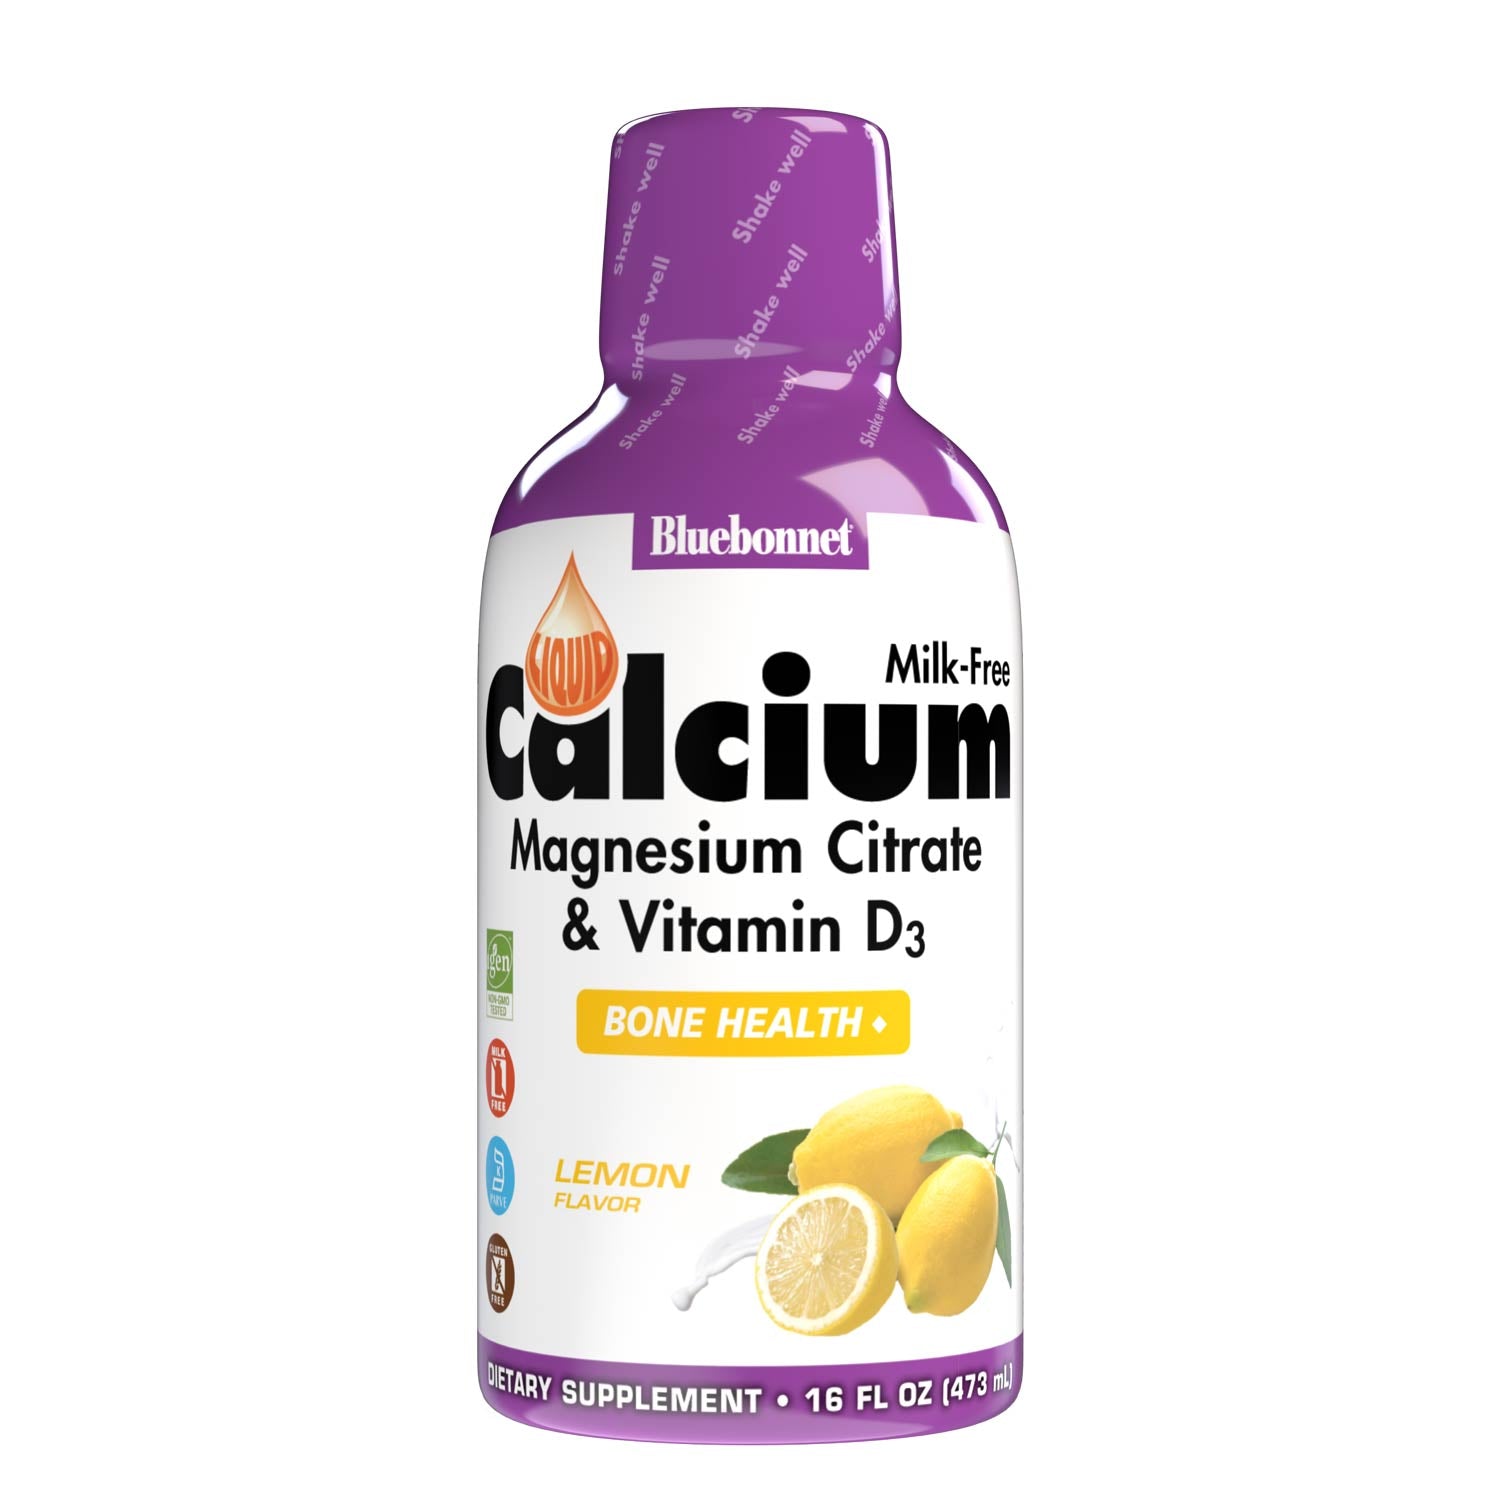 Bluebonnet's Liquid Calcium Magnesium Citrate with Vitamin D3 are formulated with calcium in a chelate of calcium citrate, as well as magnesium in a chelate of magnesium citrate and magnesium aspartate in a delicious lemon flavor. Plus, this formula are formulated with vitamin D3 (cholecalciferol) from lanolin for strong healthy bones. #flavor_lemon